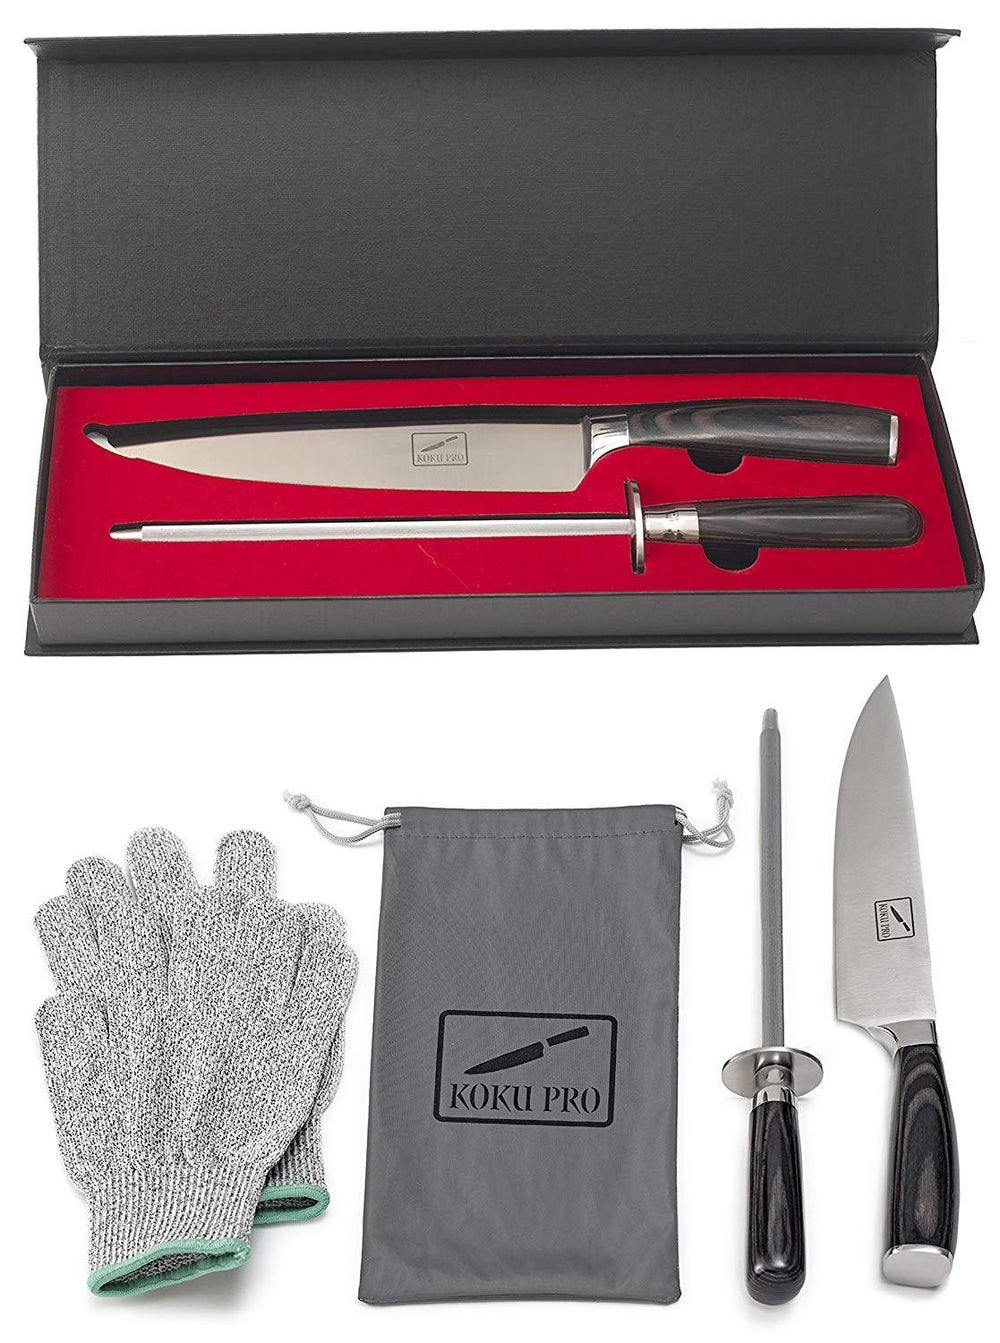 8 Chef Knife, Professional Stainless Steel Kitchen Cooking Knife, Sharp  Meat Cutting Knives with Gift Box 